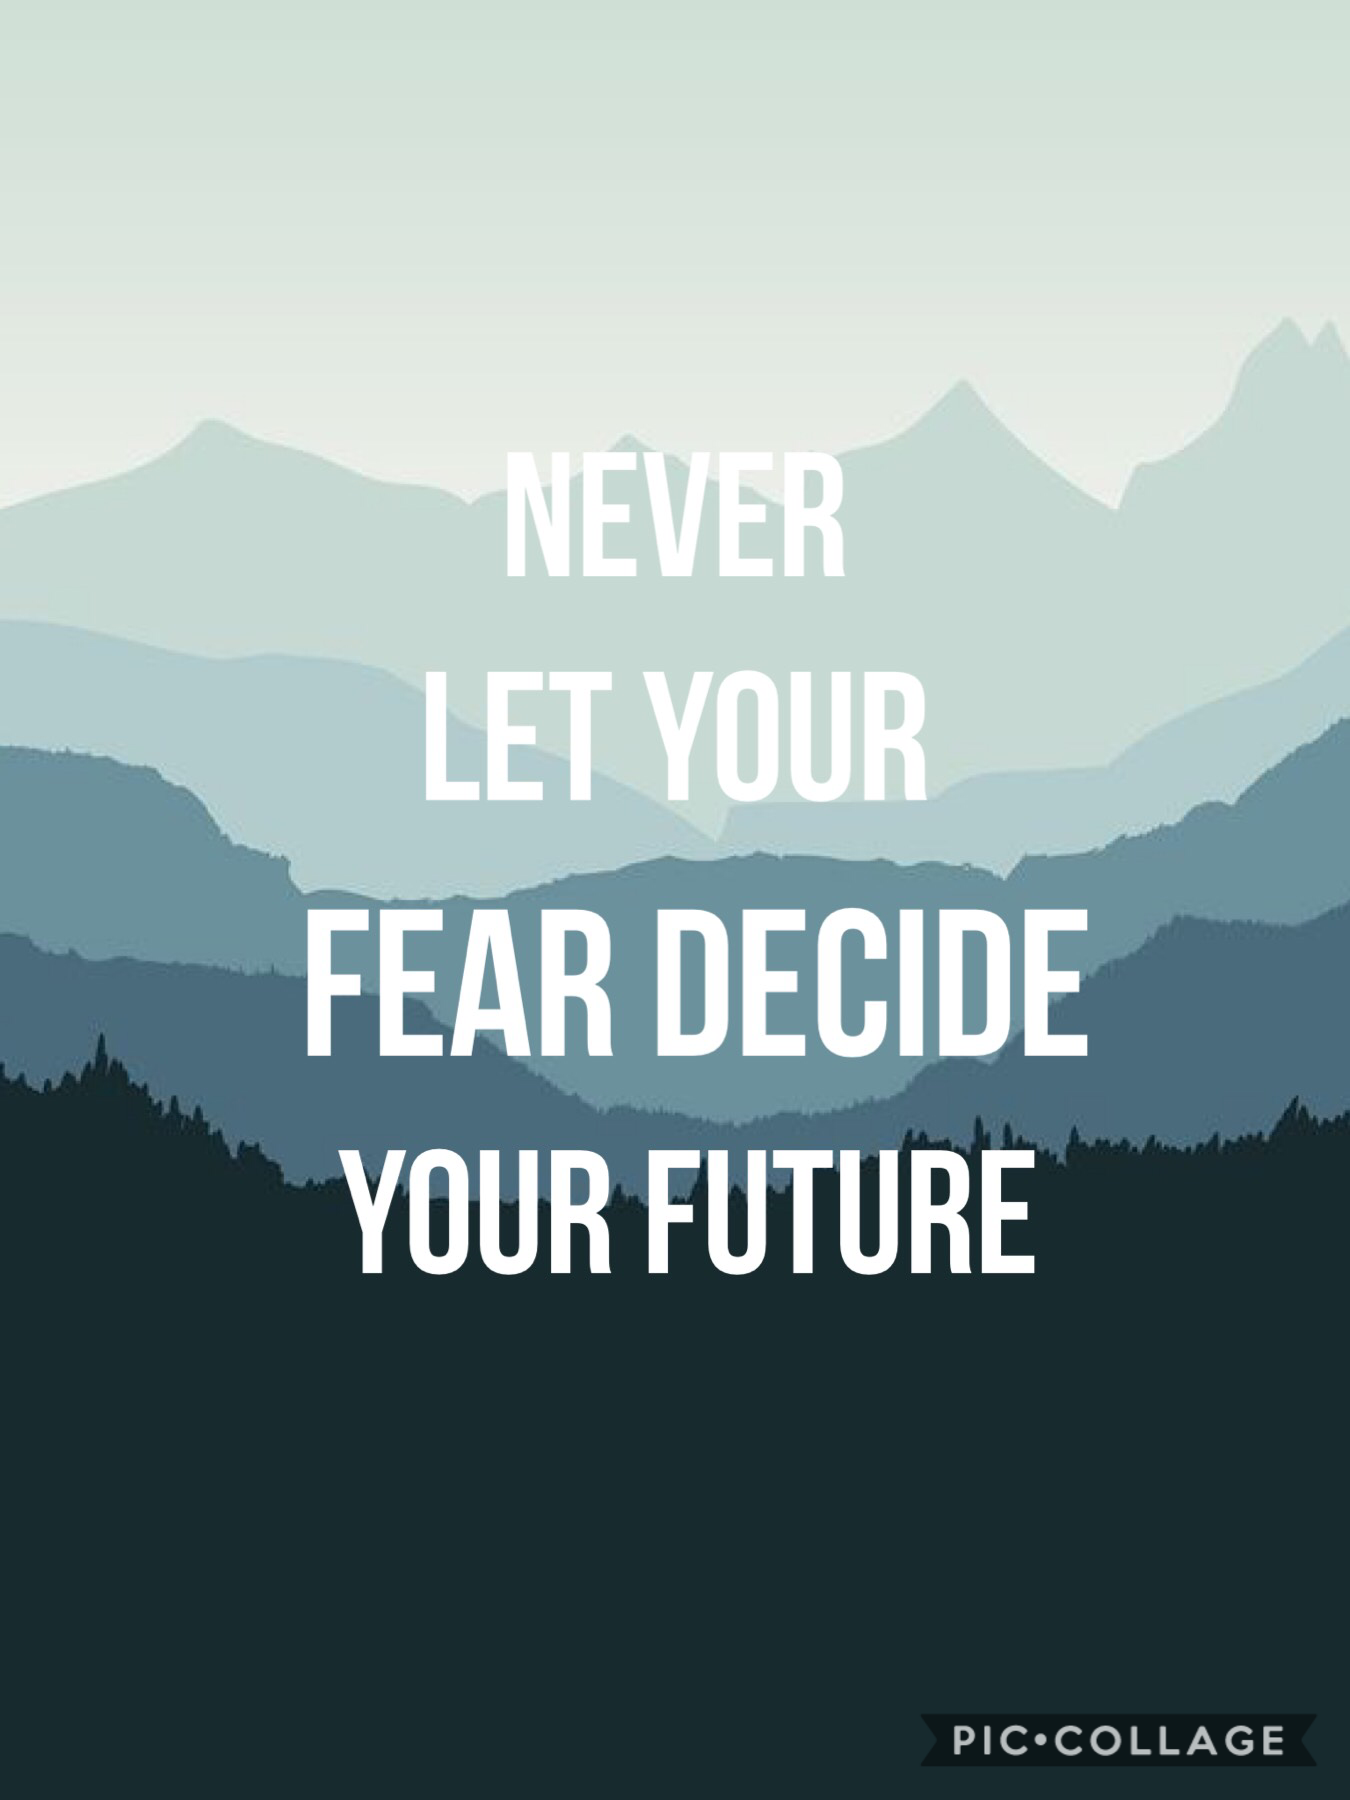 Never let you fear decide your future 👍